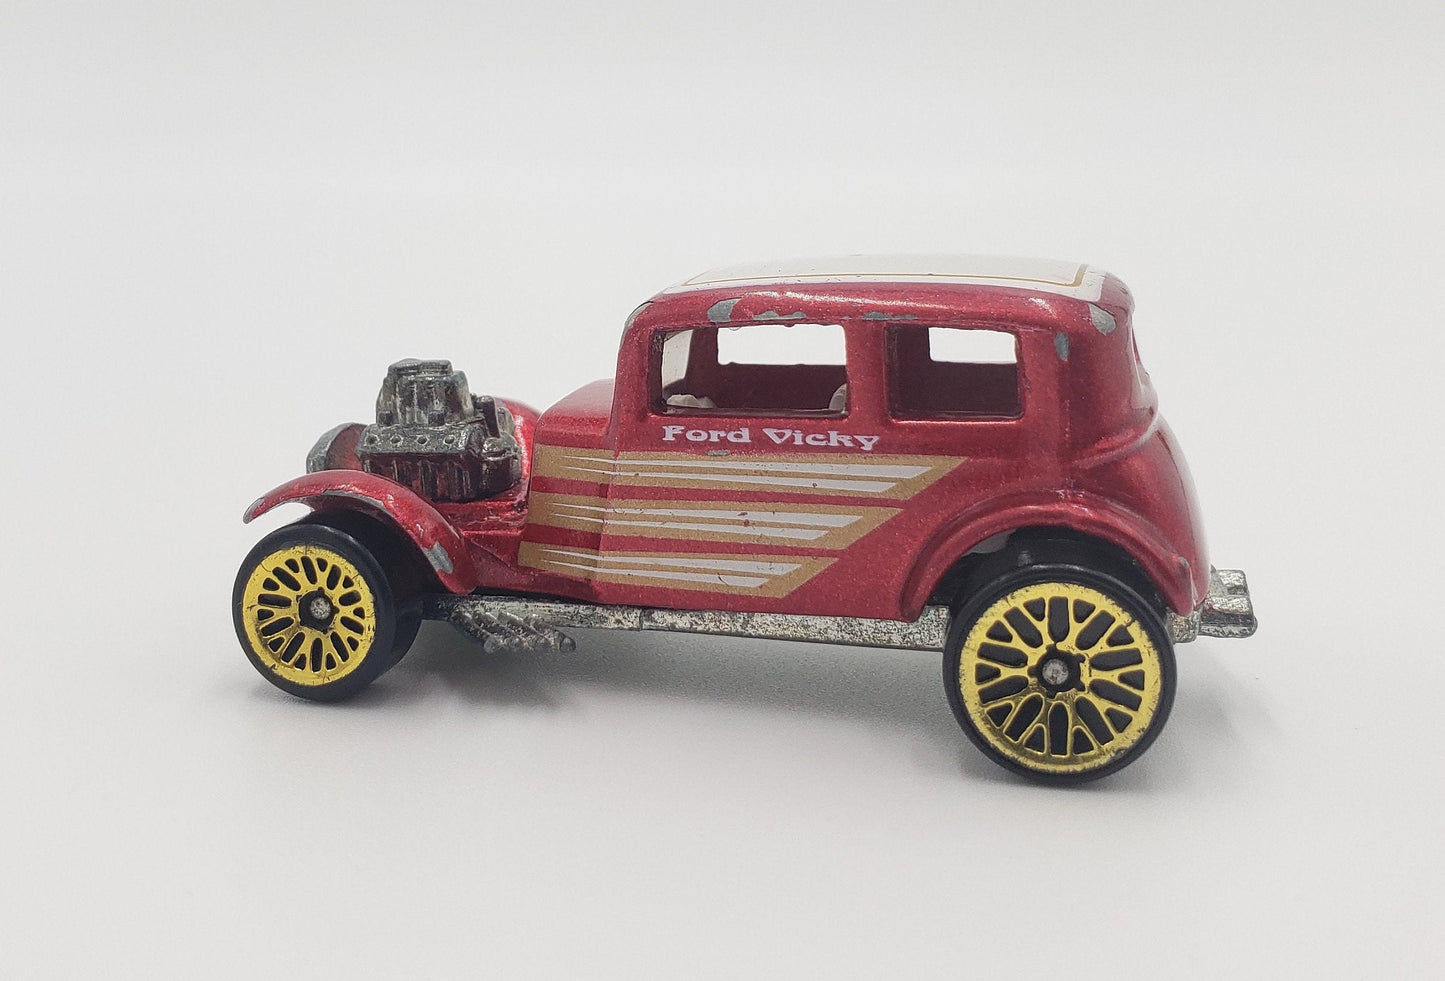 Hot Wheels '32 Ford Vicky Dark Red Vintage Hot Rods Perfect Birthday Gift Miniature Collectible Scale Model Diecast Toy Car